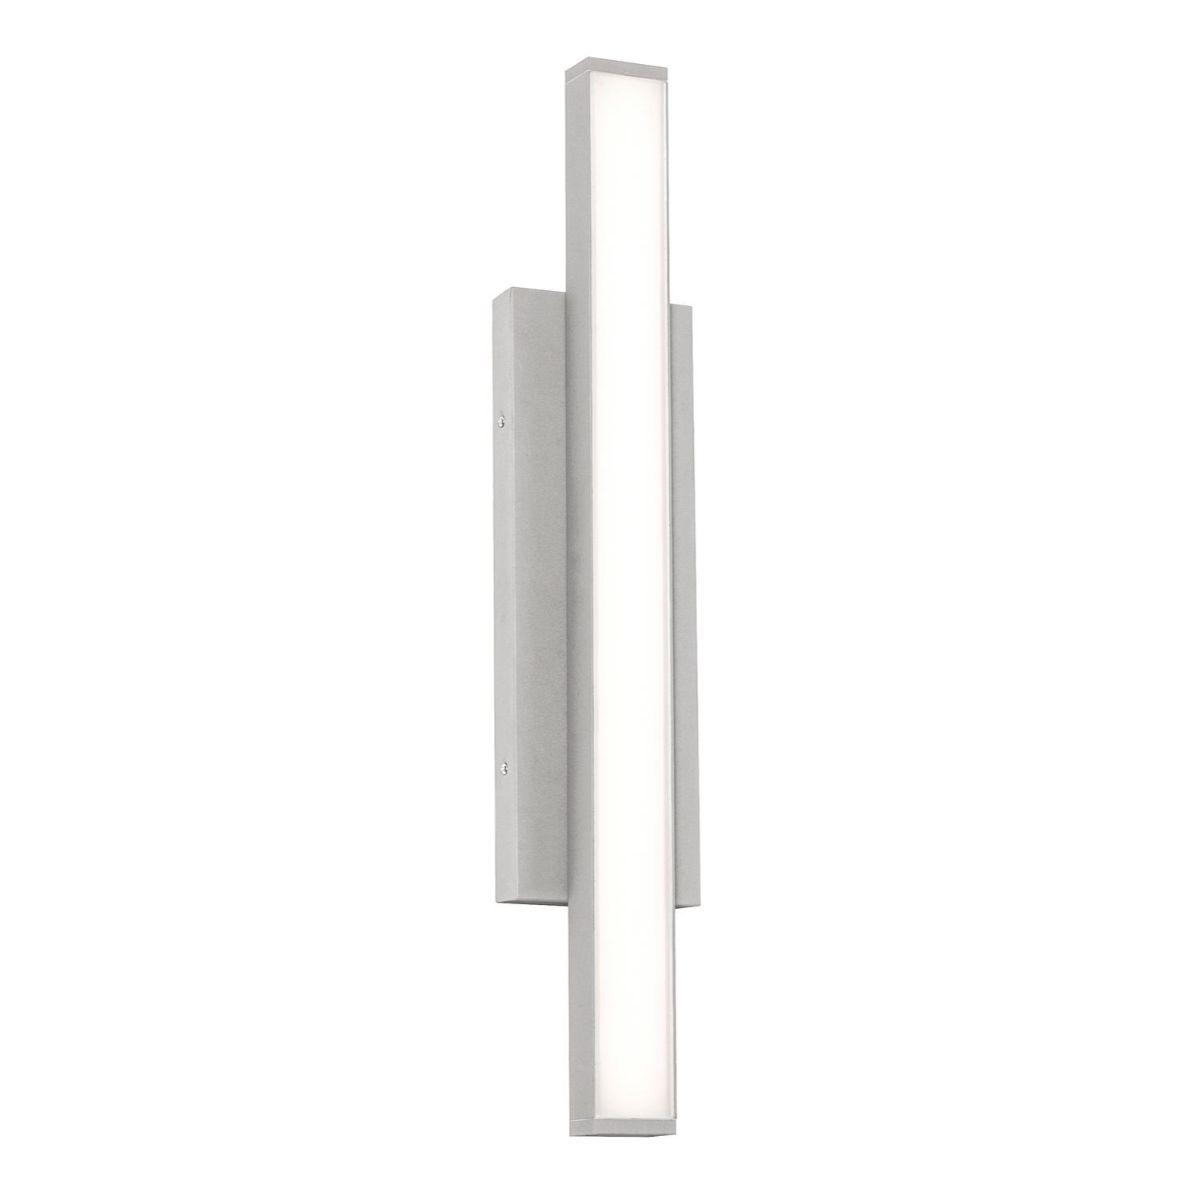 Gale 24 in. LED Outdoor Wall Sconce 1000 lumens 3000K Emergency Battery Included